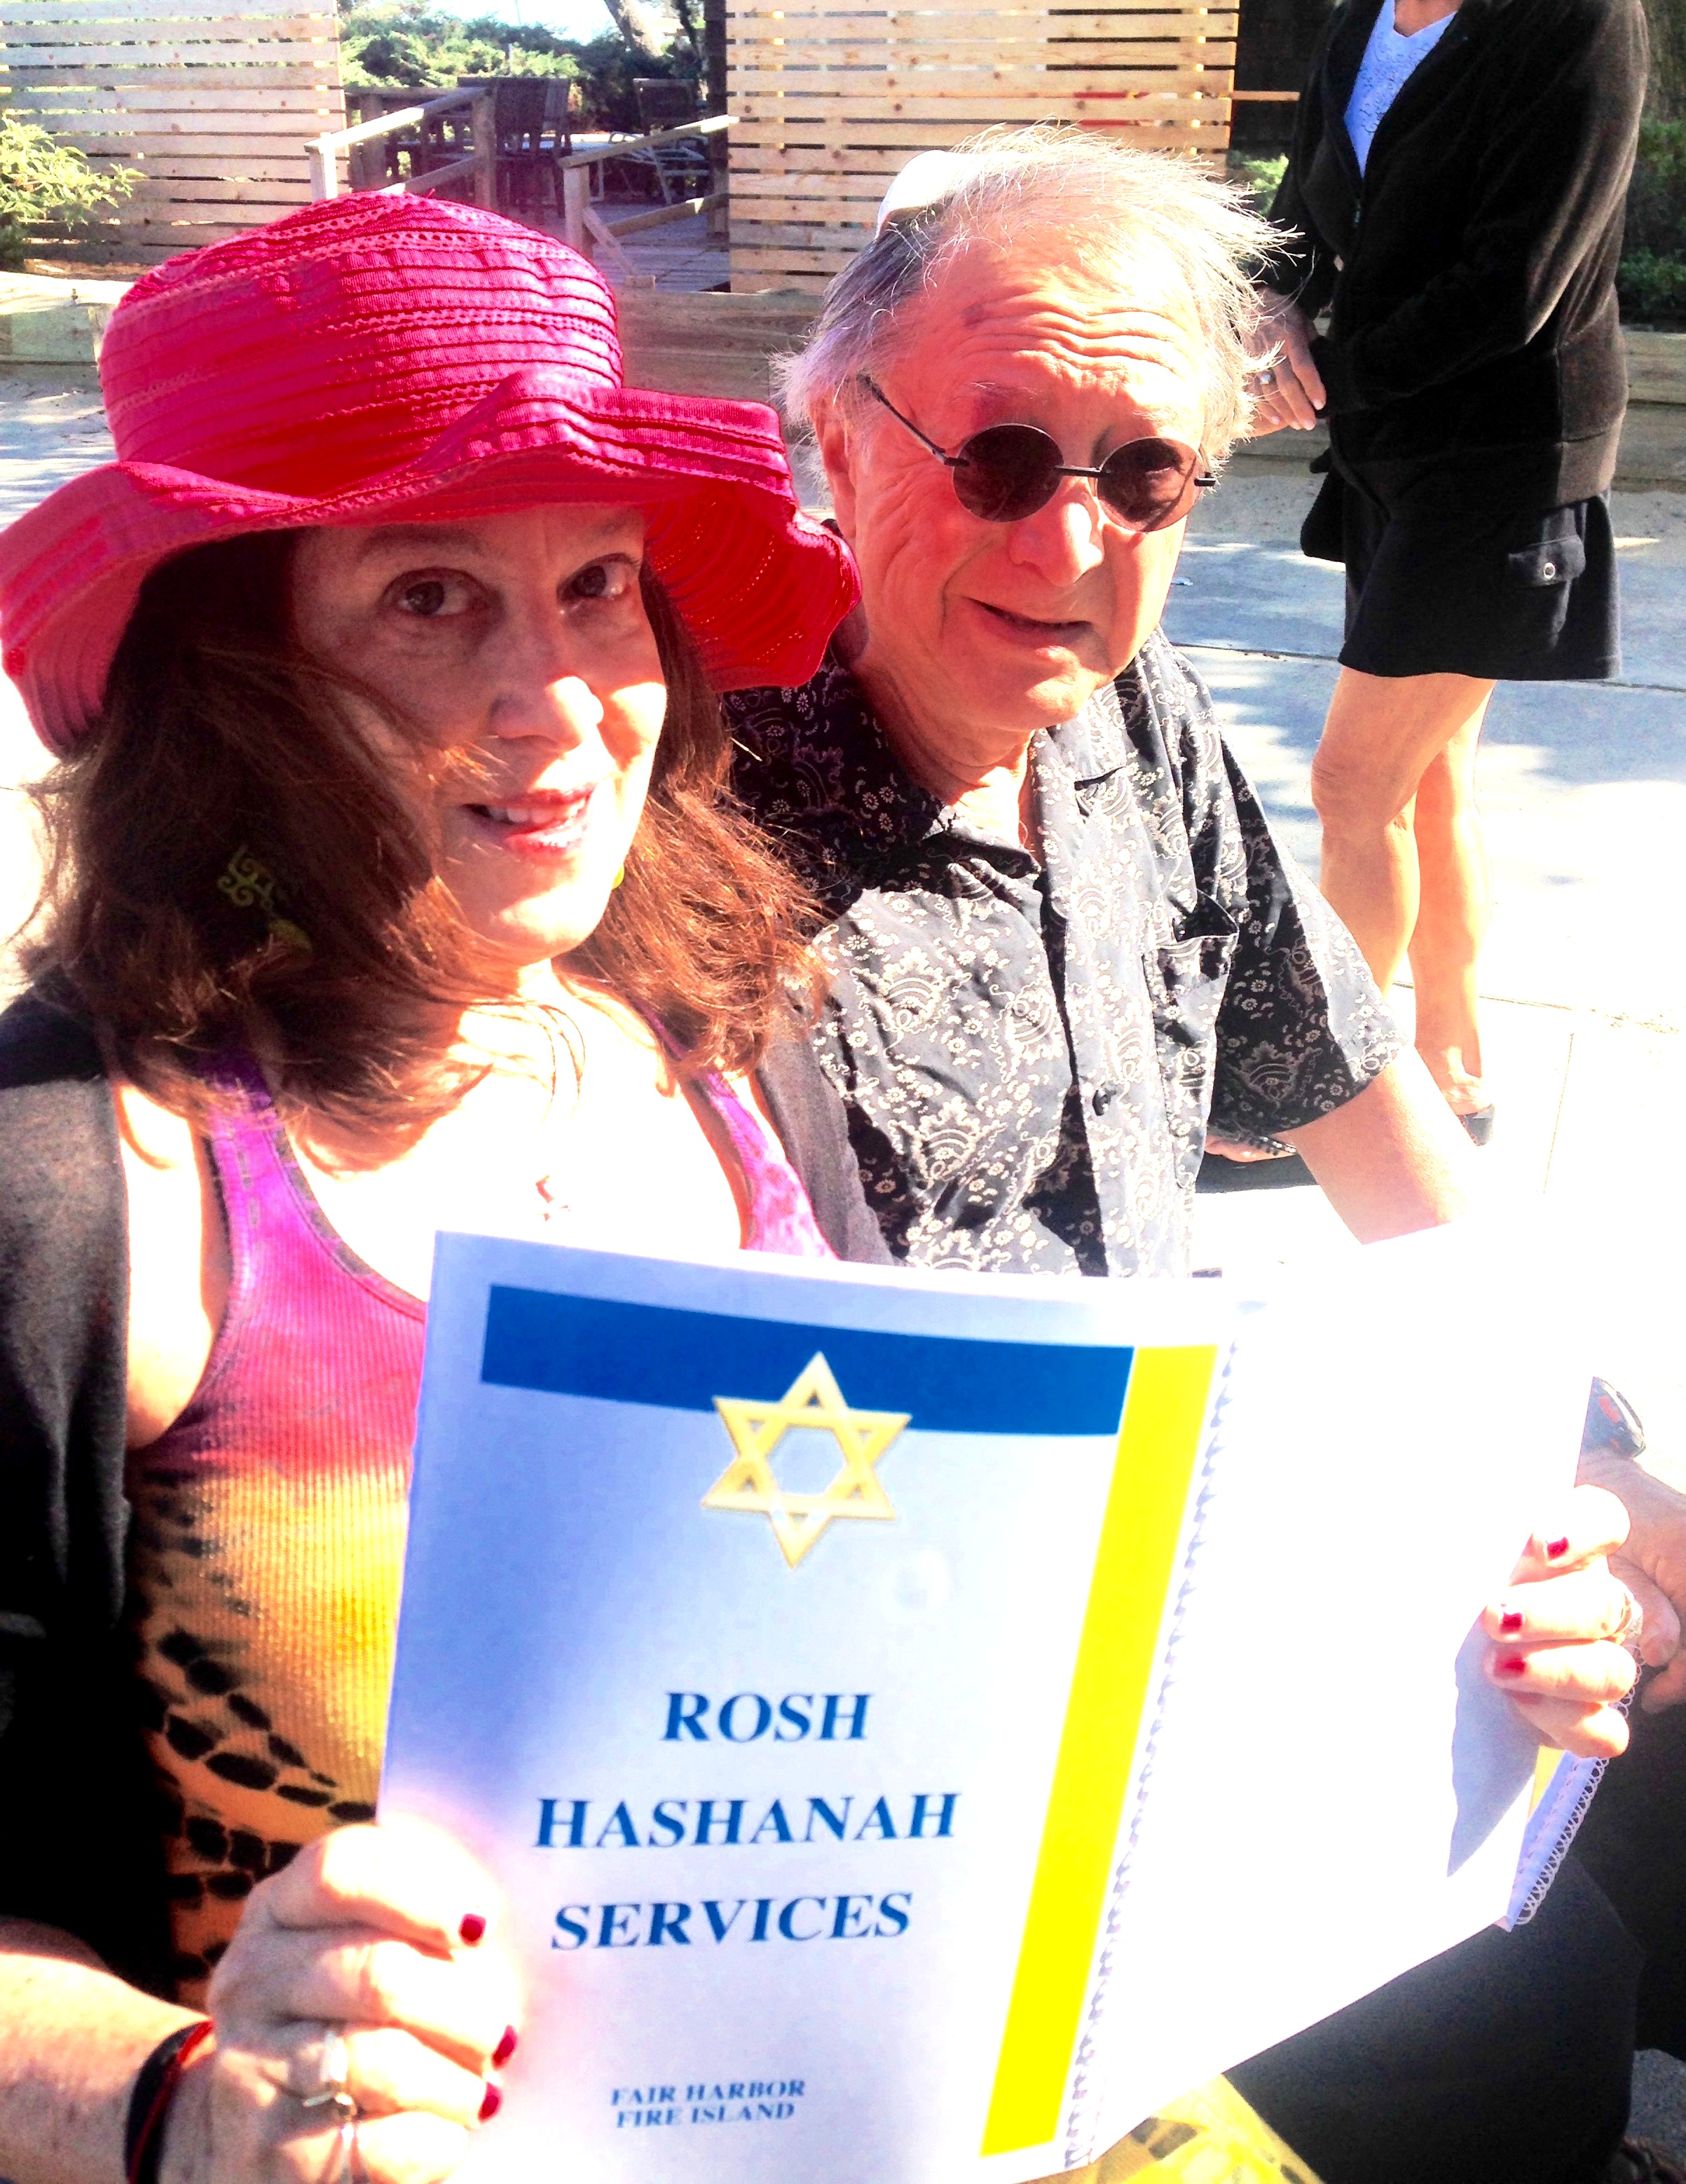 At Rosh Hashanah services on Fire Island.jpg